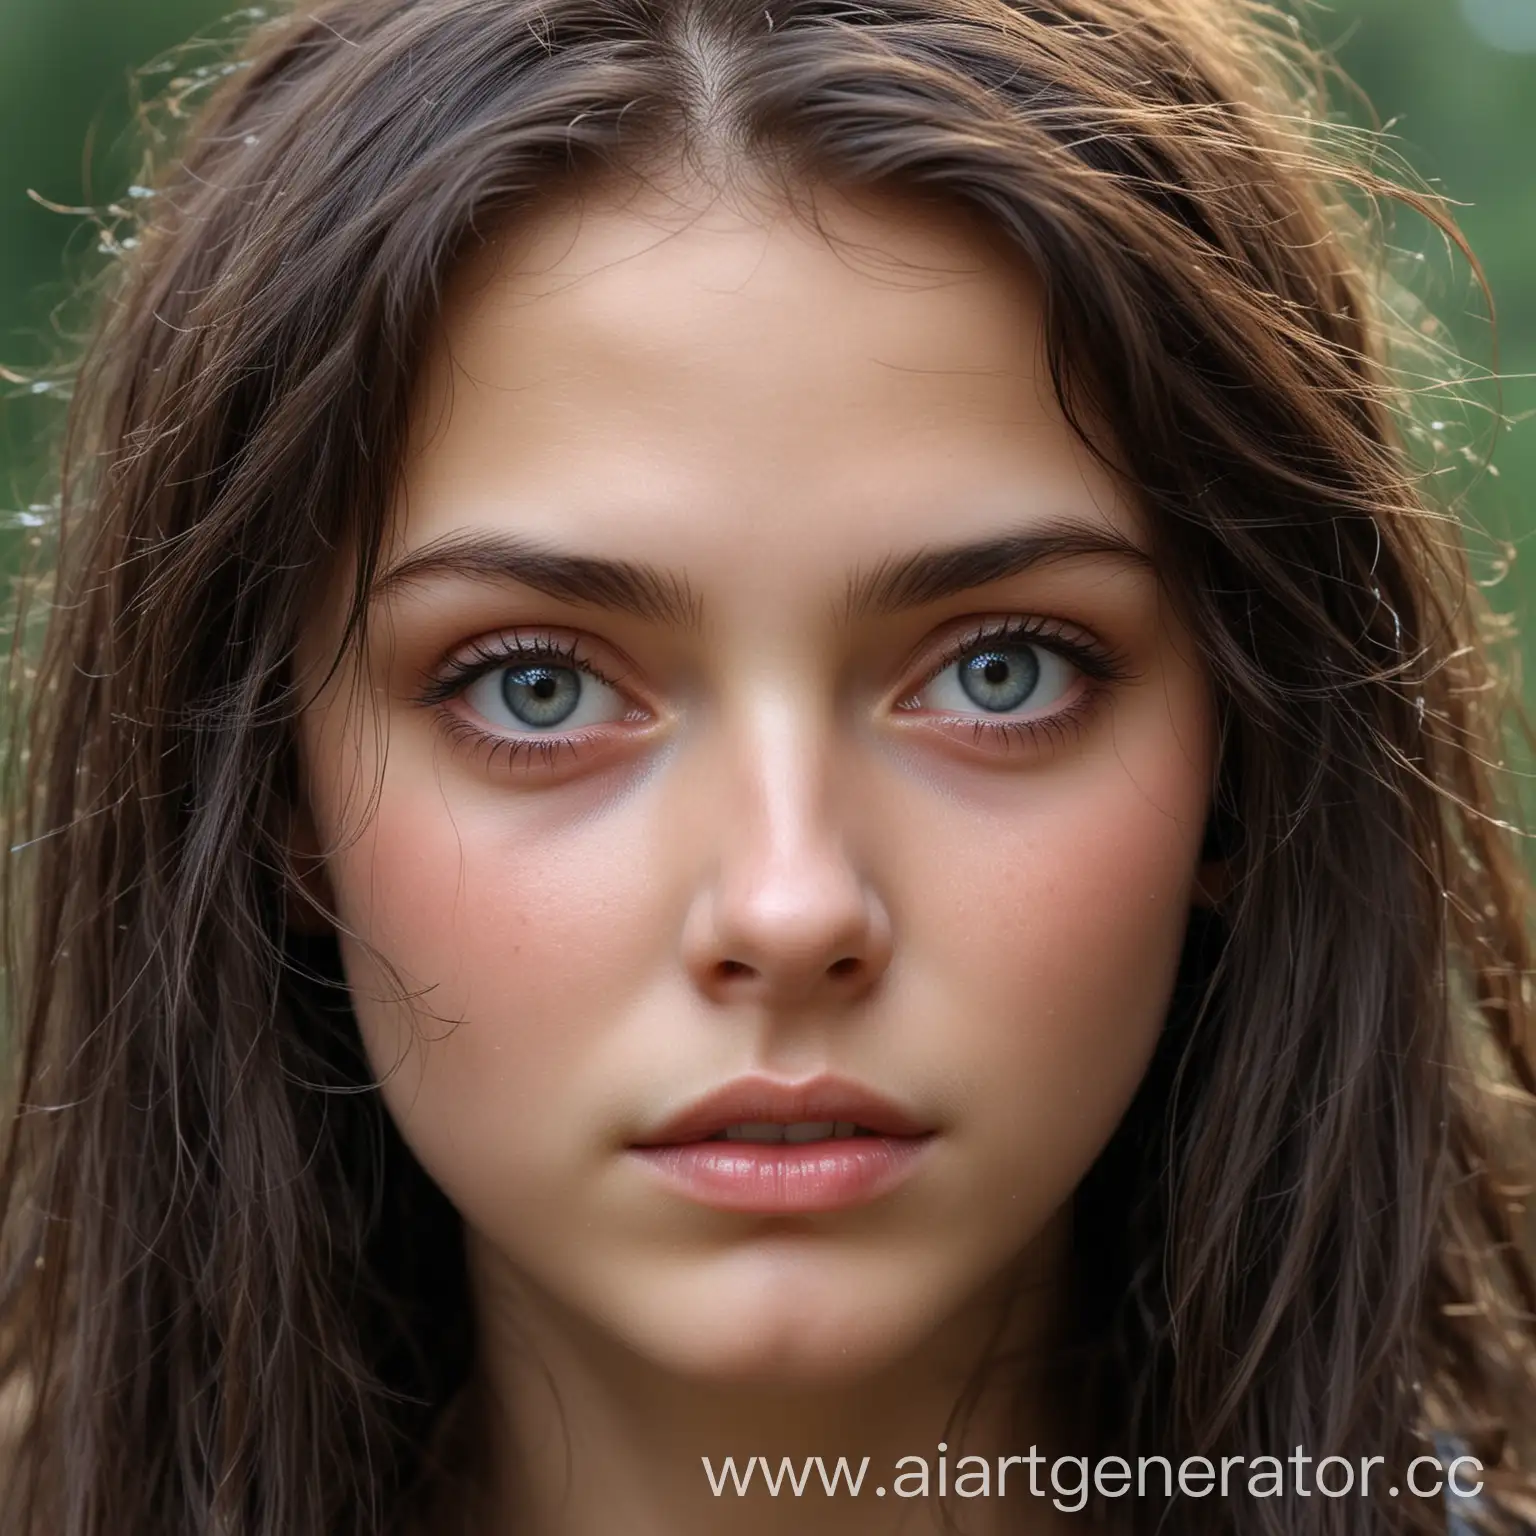 Enigmatic-Beauty-with-Supernatural-Sparkle-Portrait-of-a-Girl-with-Piercing-Eyes